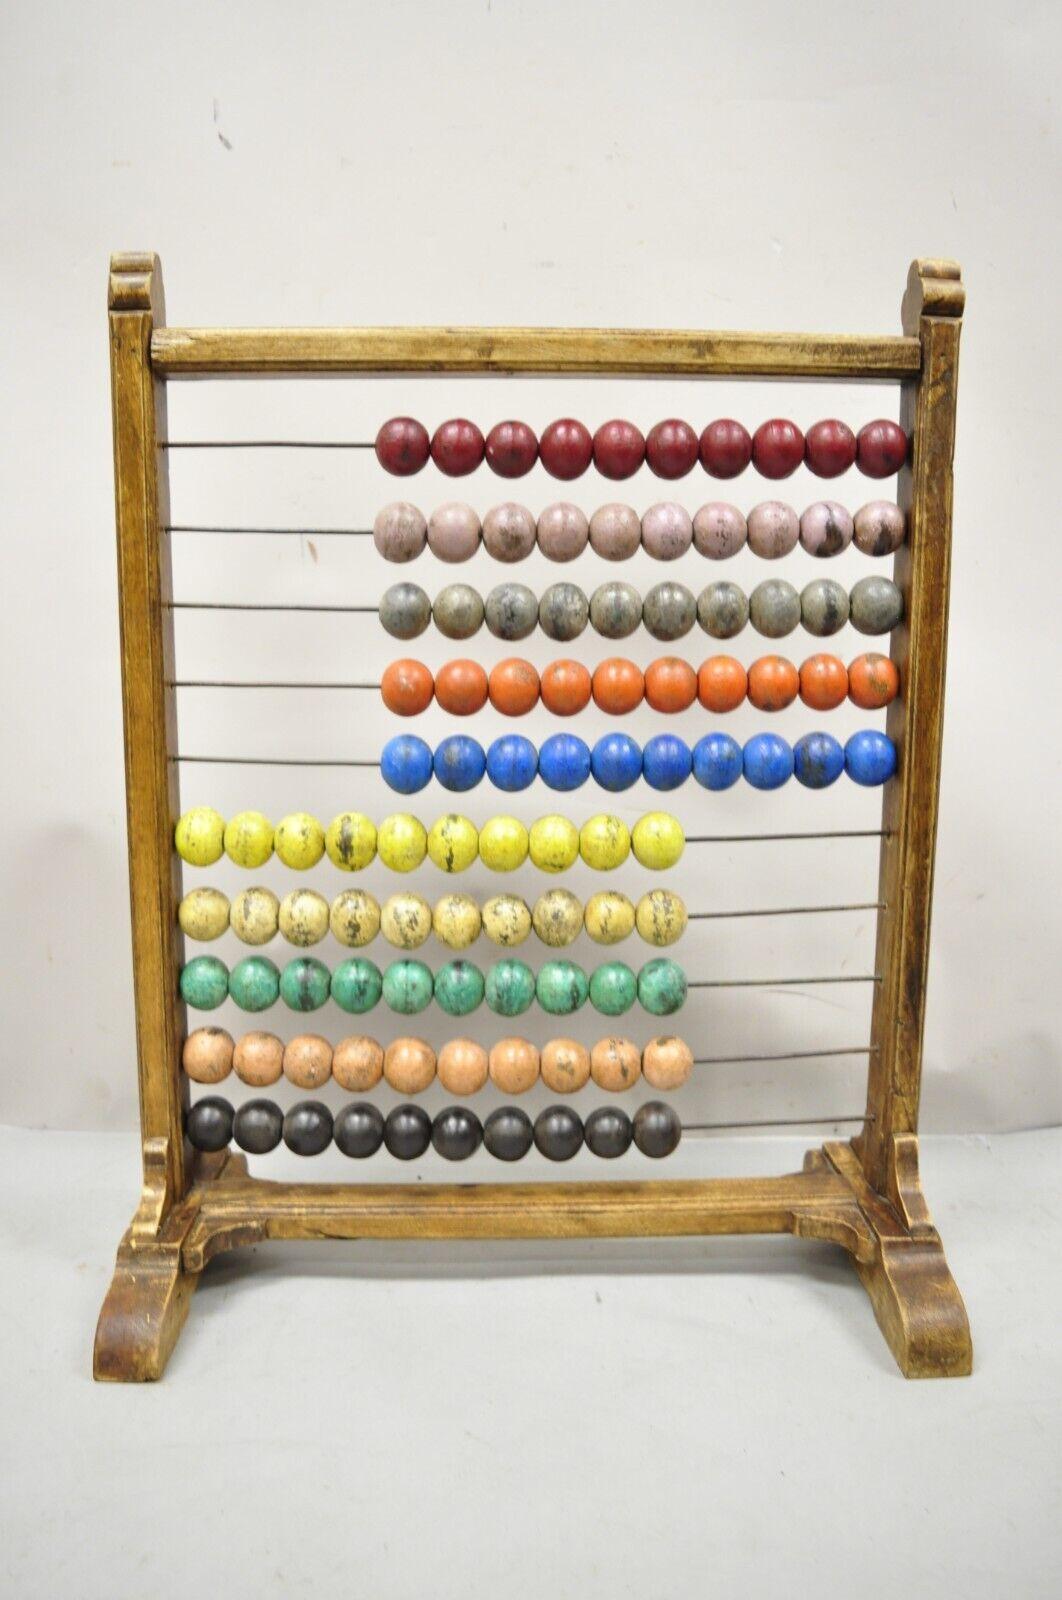 Large Vintage Mongolian Wooden Math Abacus with Painted Wooden Balls. Item features painted wooden balls in red, purple, gray, orange, blue, yellow, green and brown. Circa Mid 20th Century, possibly older (age undetermined). 
Measurements: 29